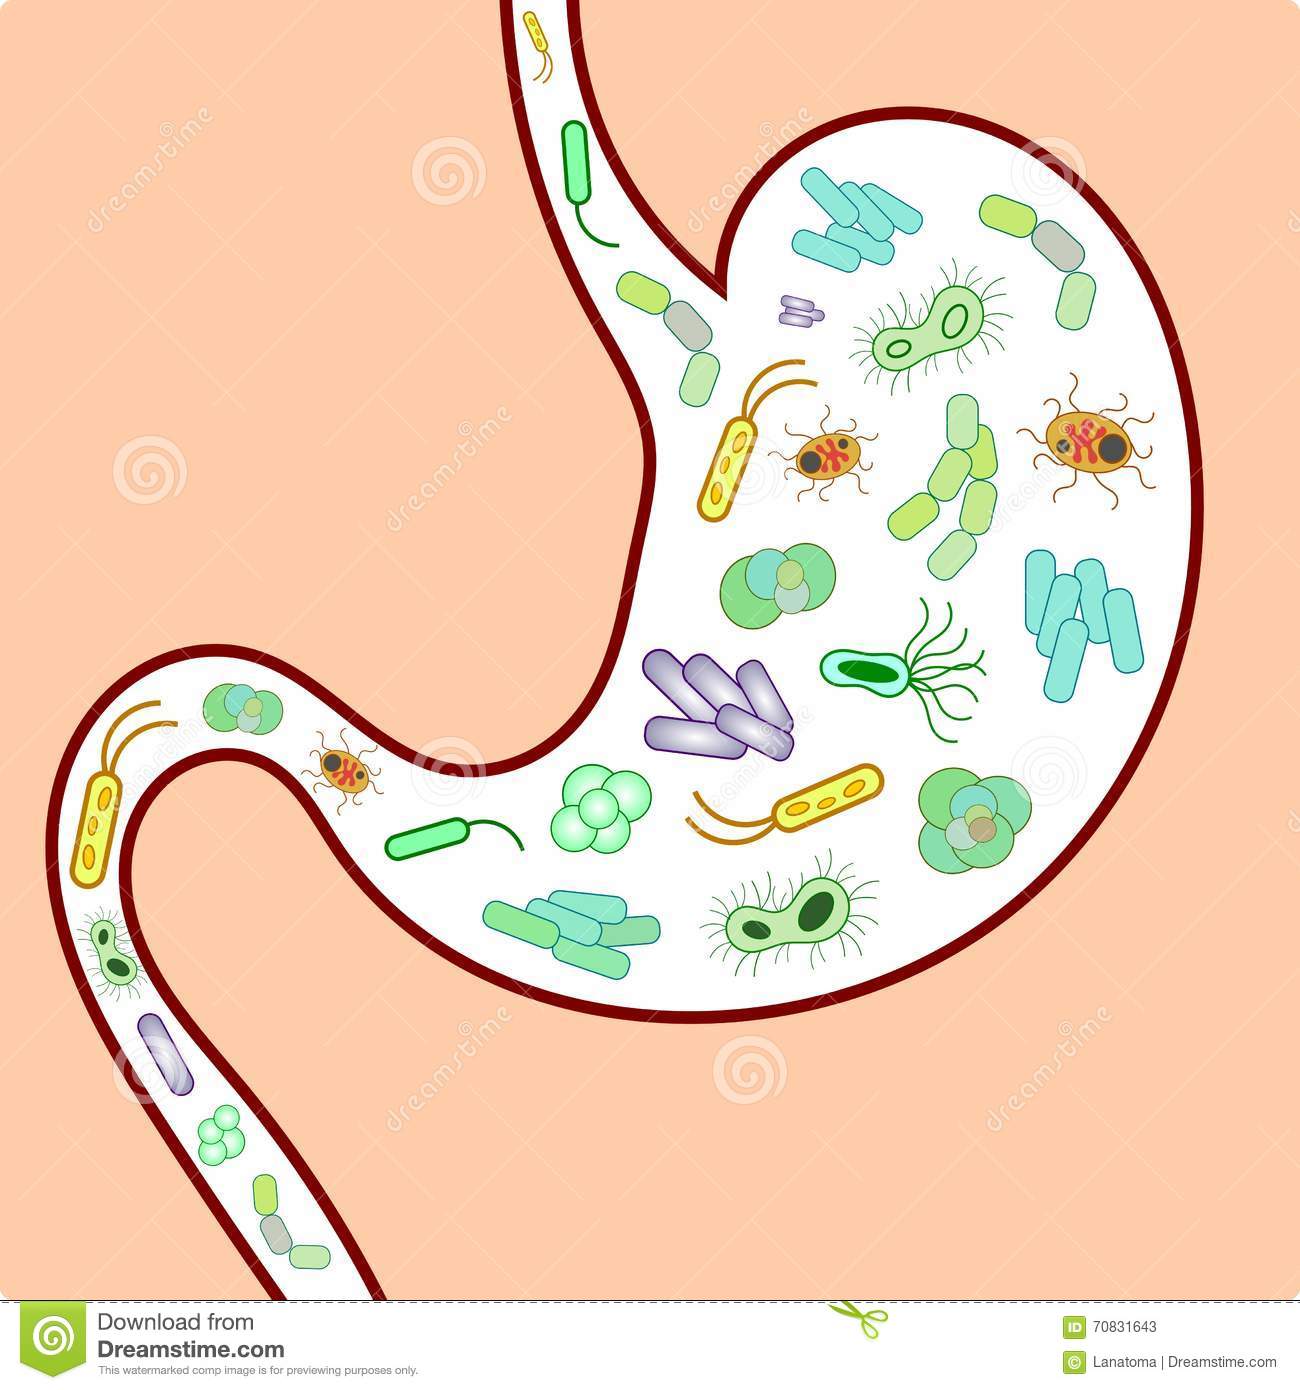 Blog post 8 - Microbiome Featured Image